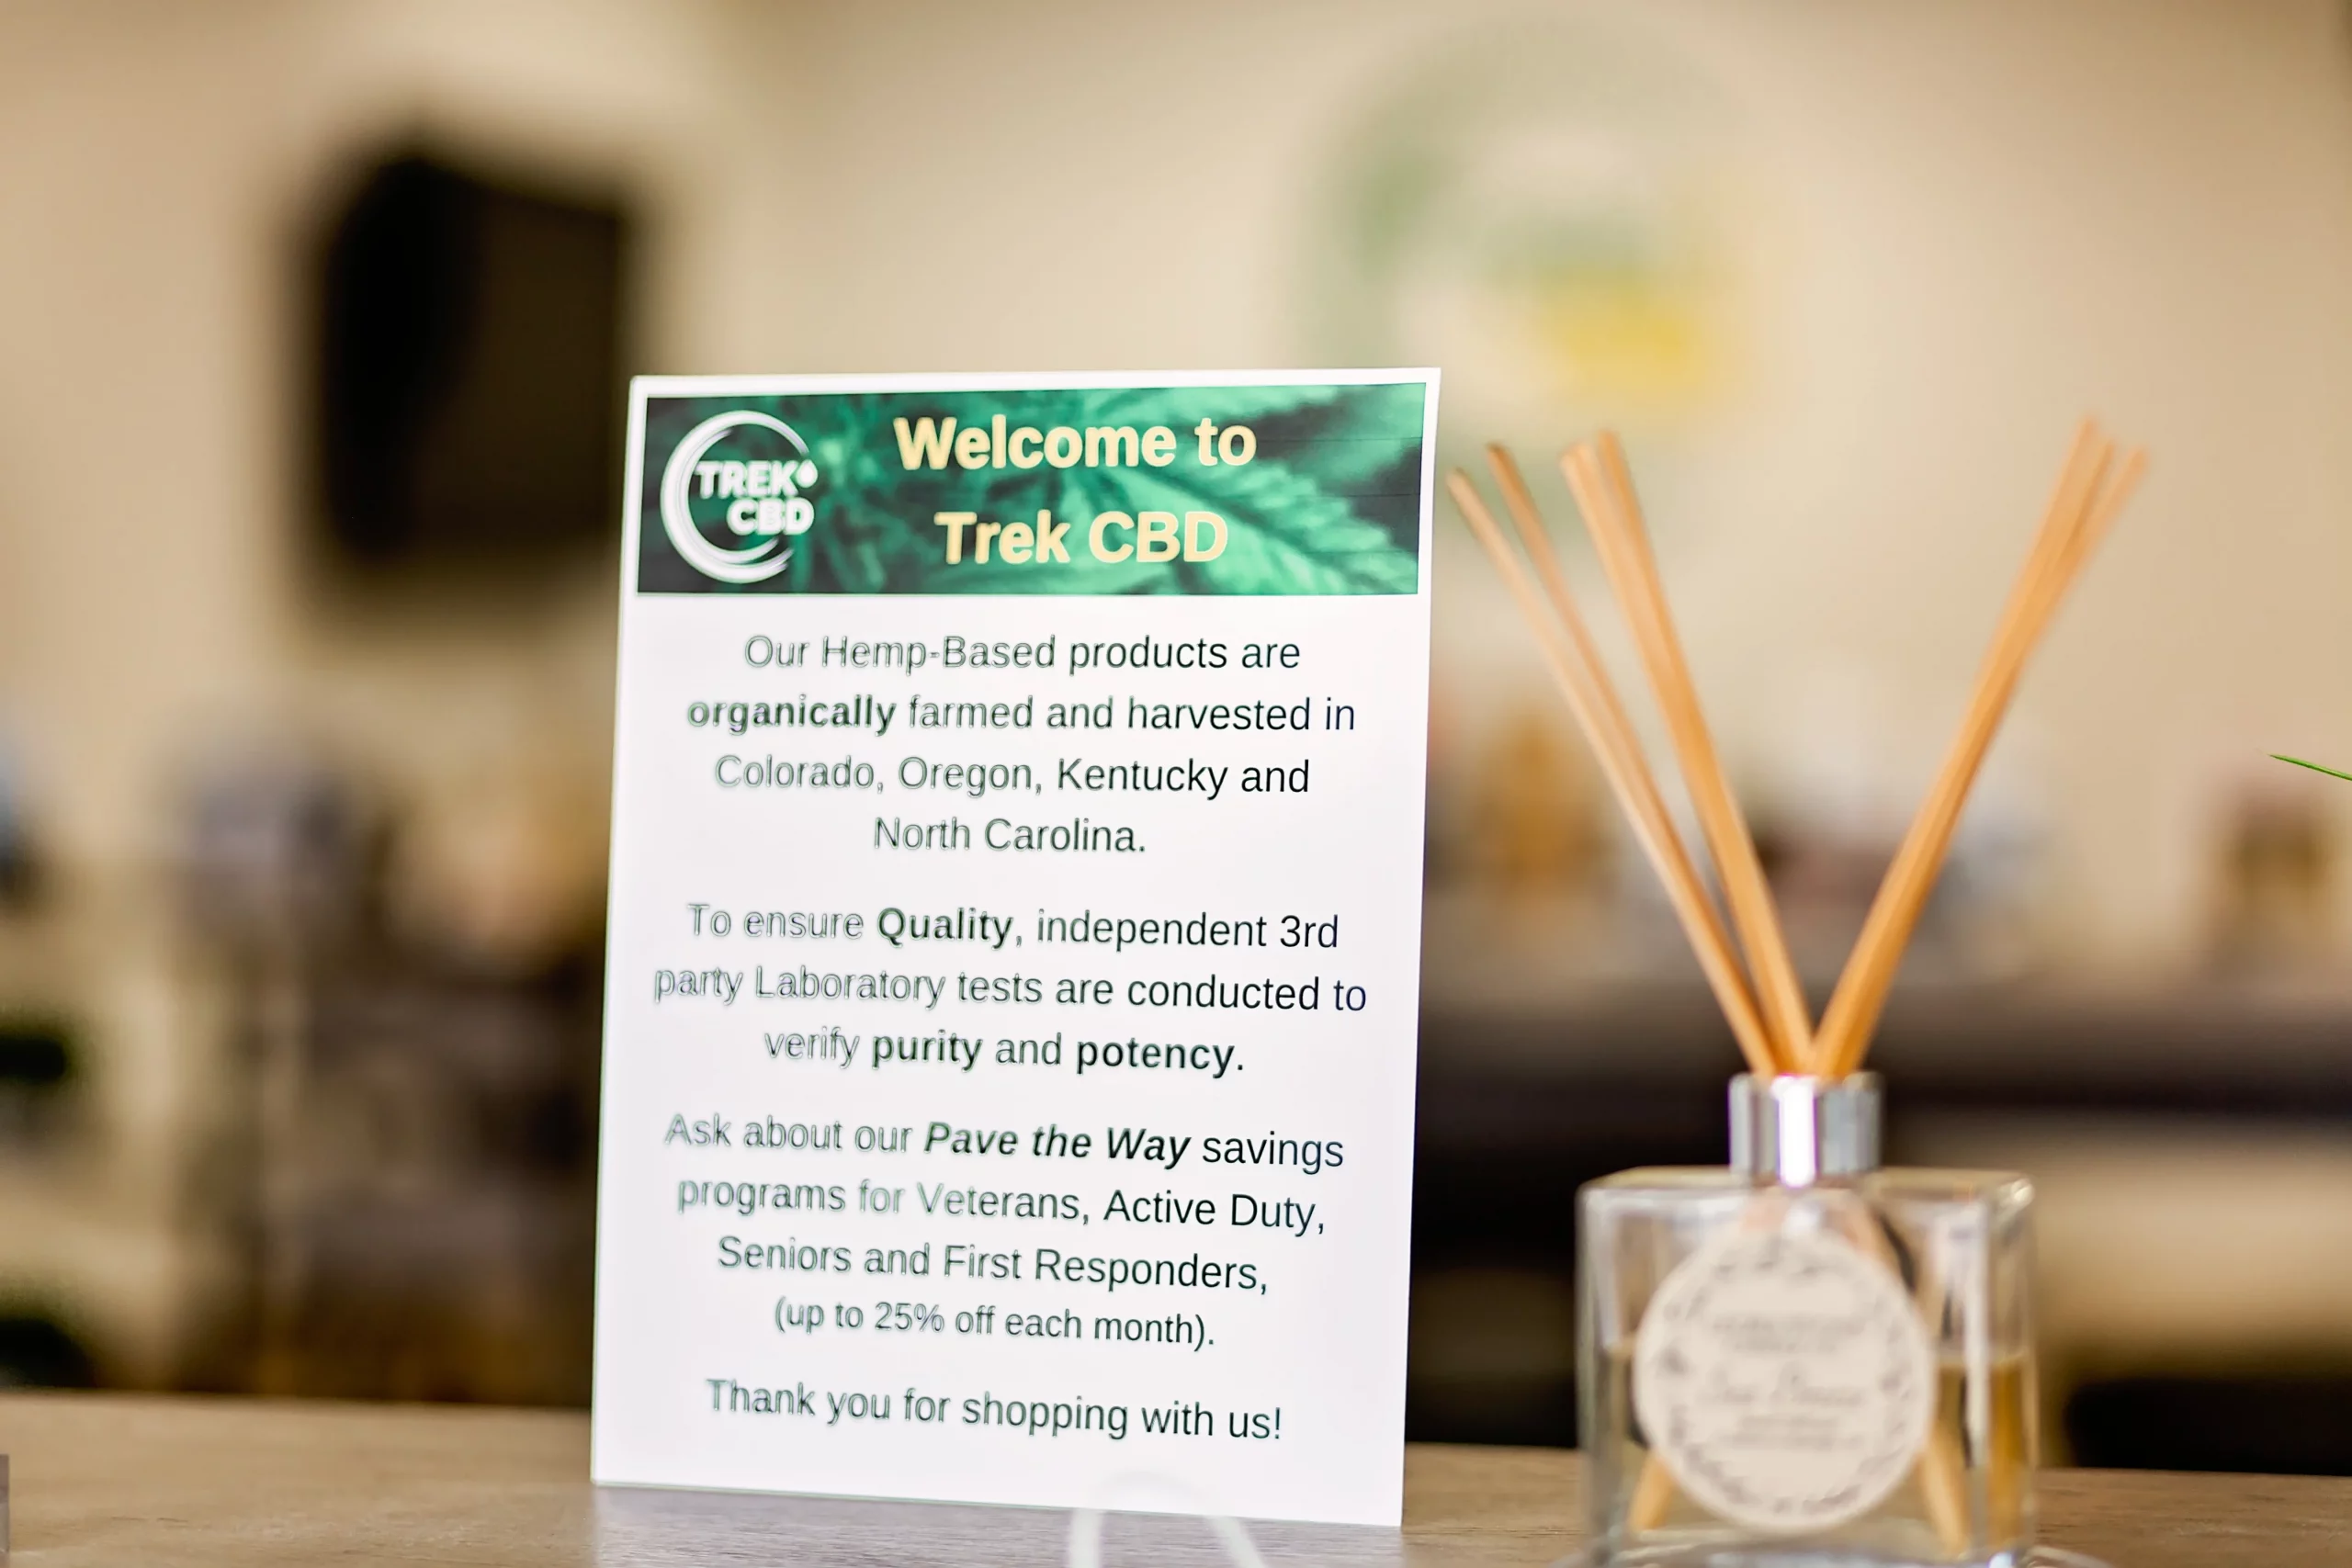 The welcome sign at the Wake Forest store for Trek CBD